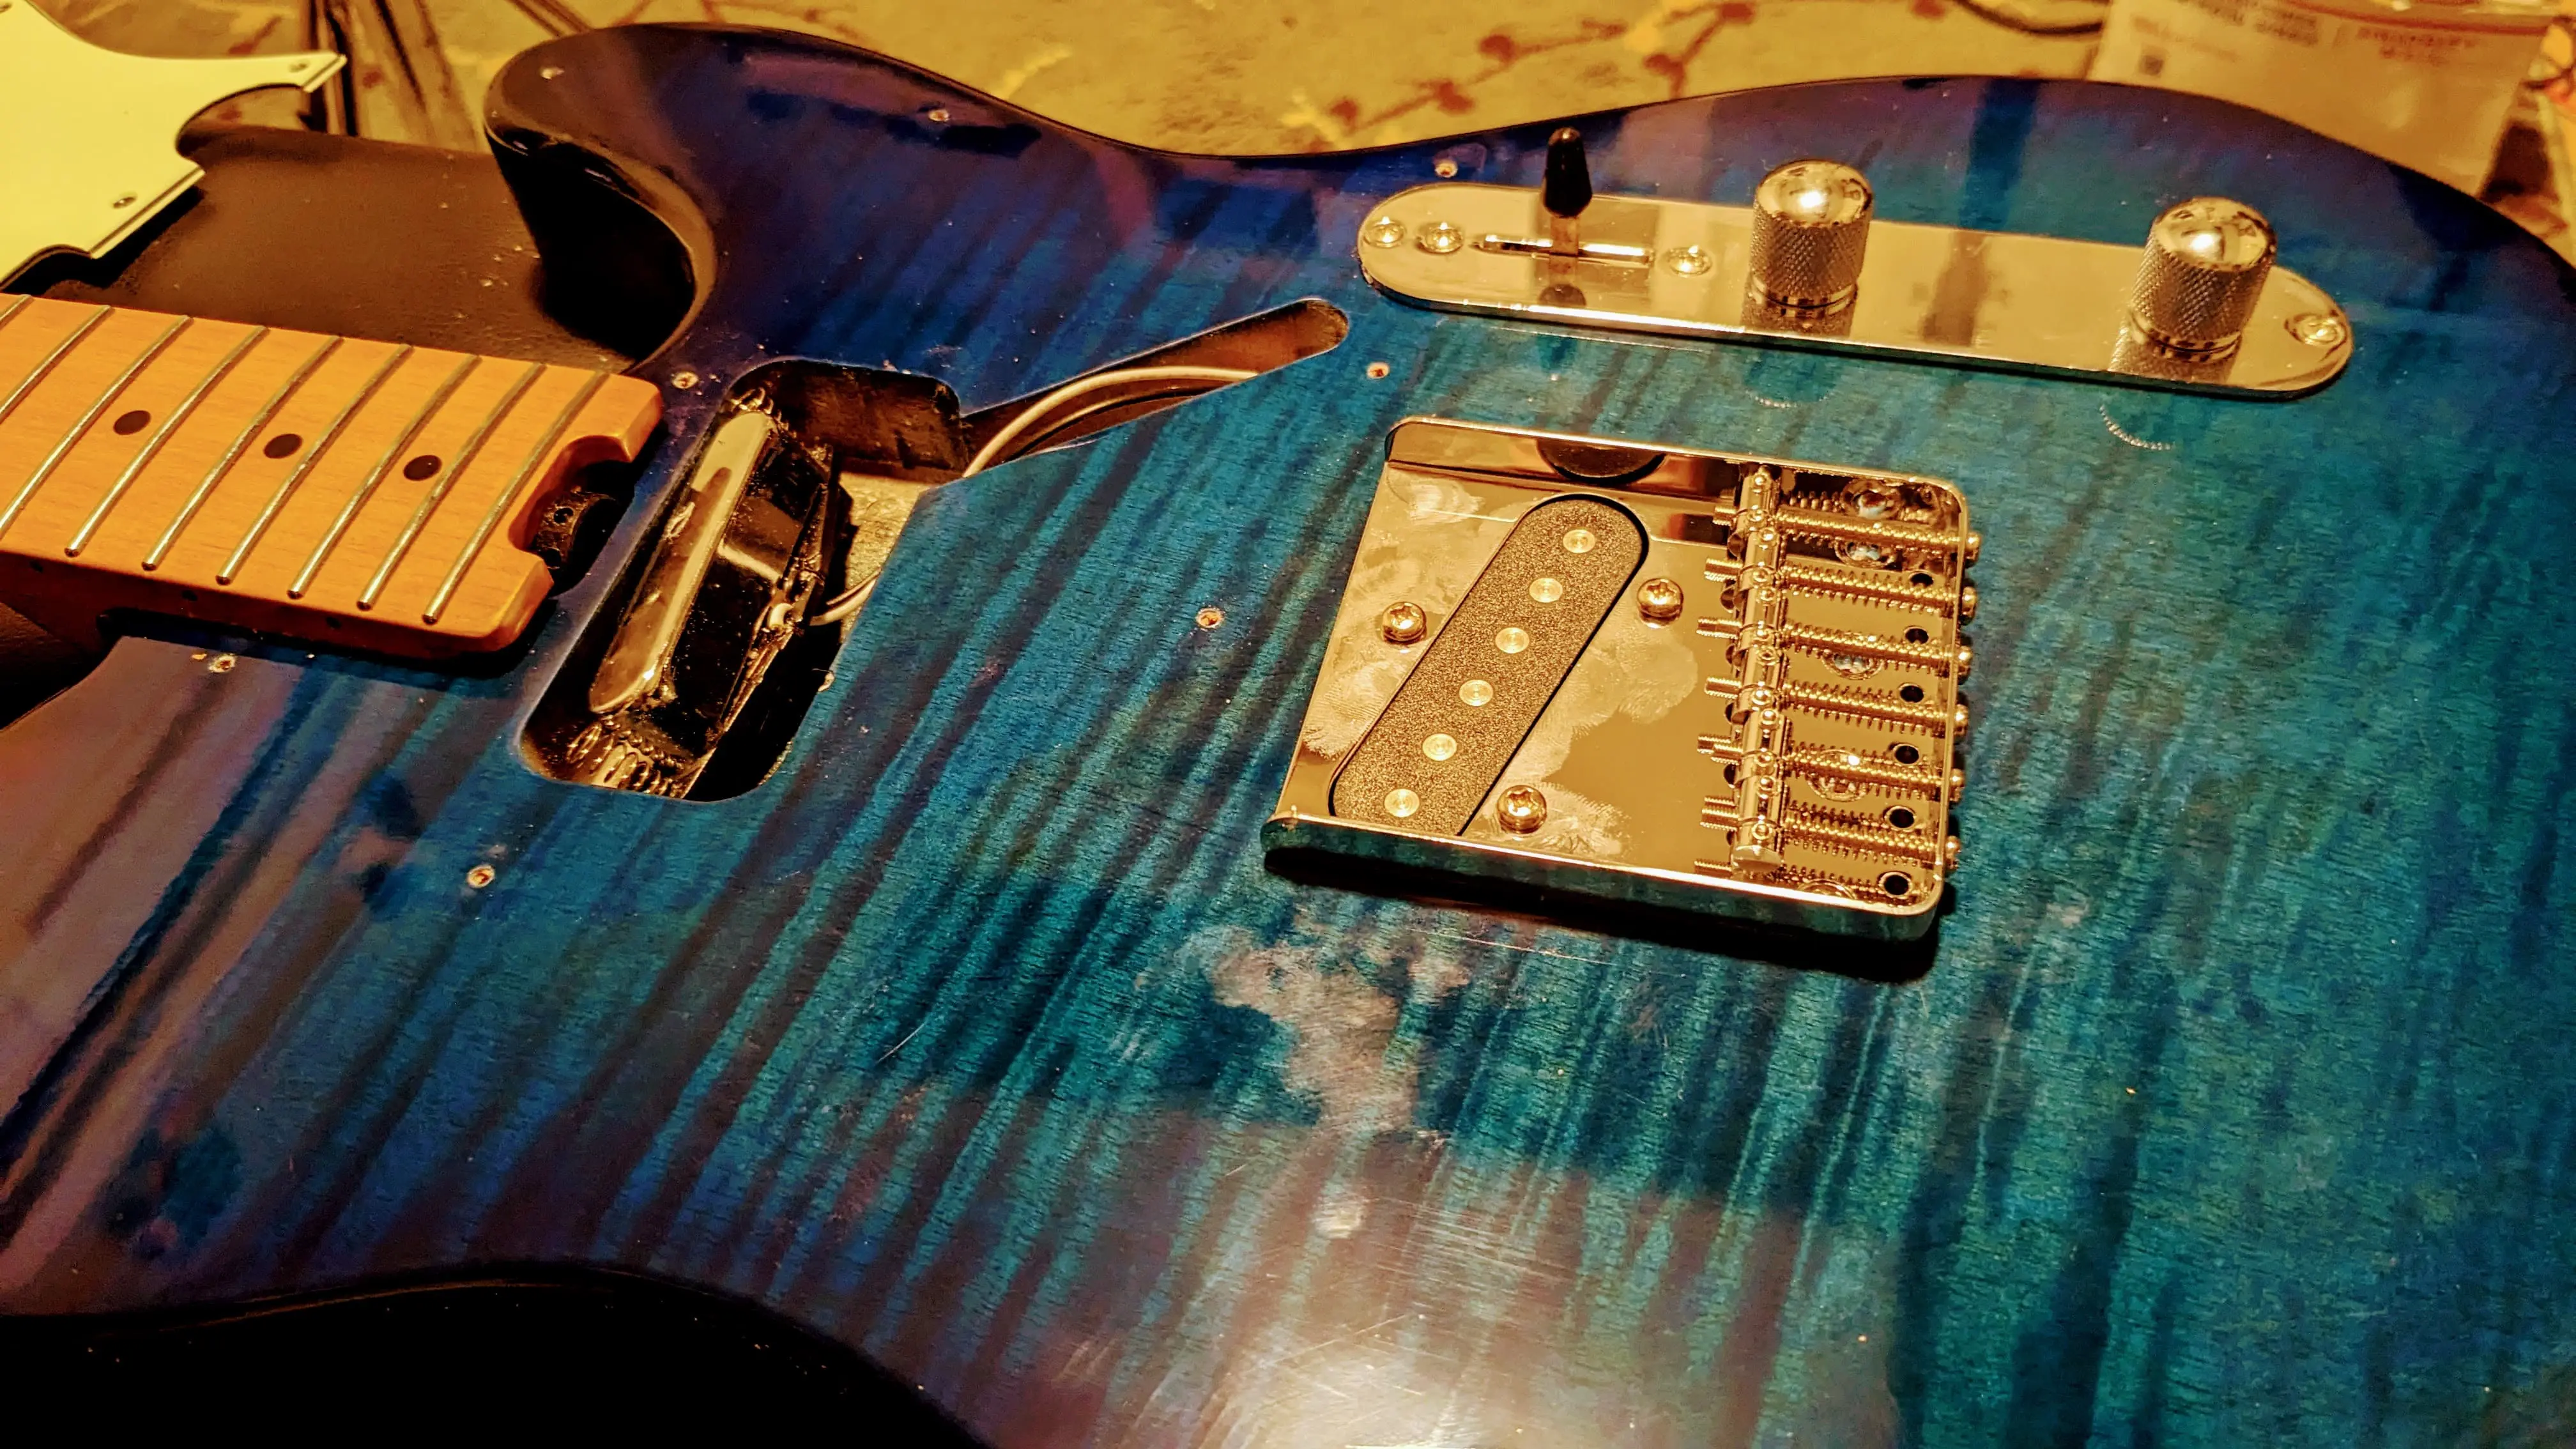 electric guitar with internals exposed on workbench